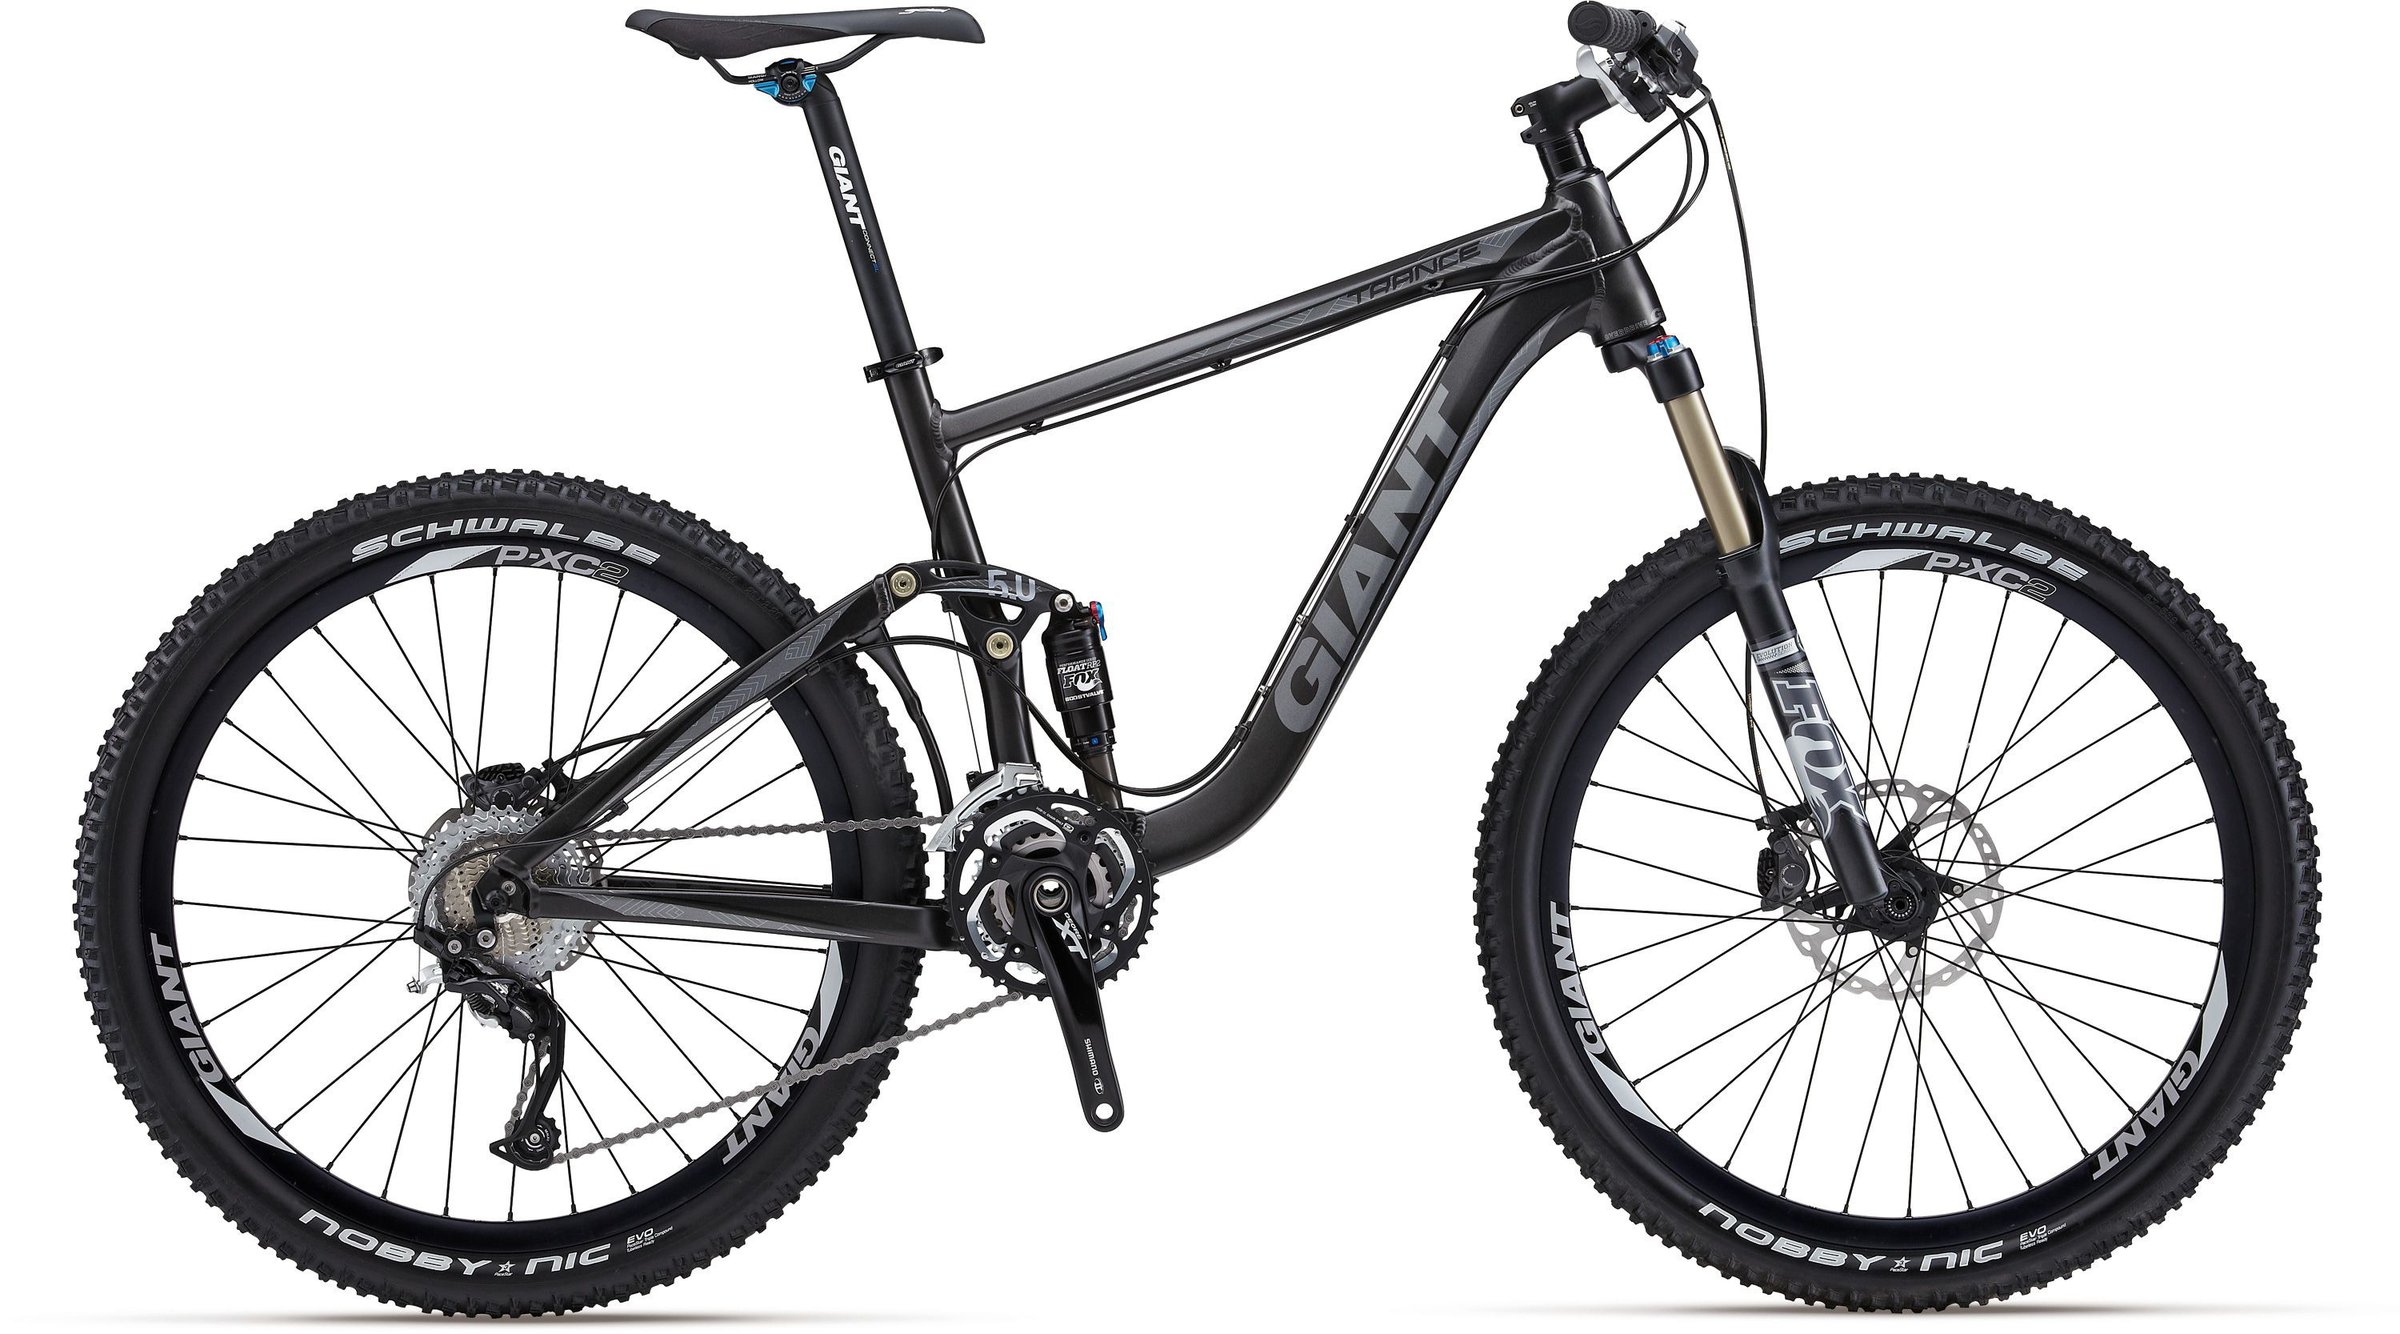 2012 Giant Trance X1 - Bicycle Details 